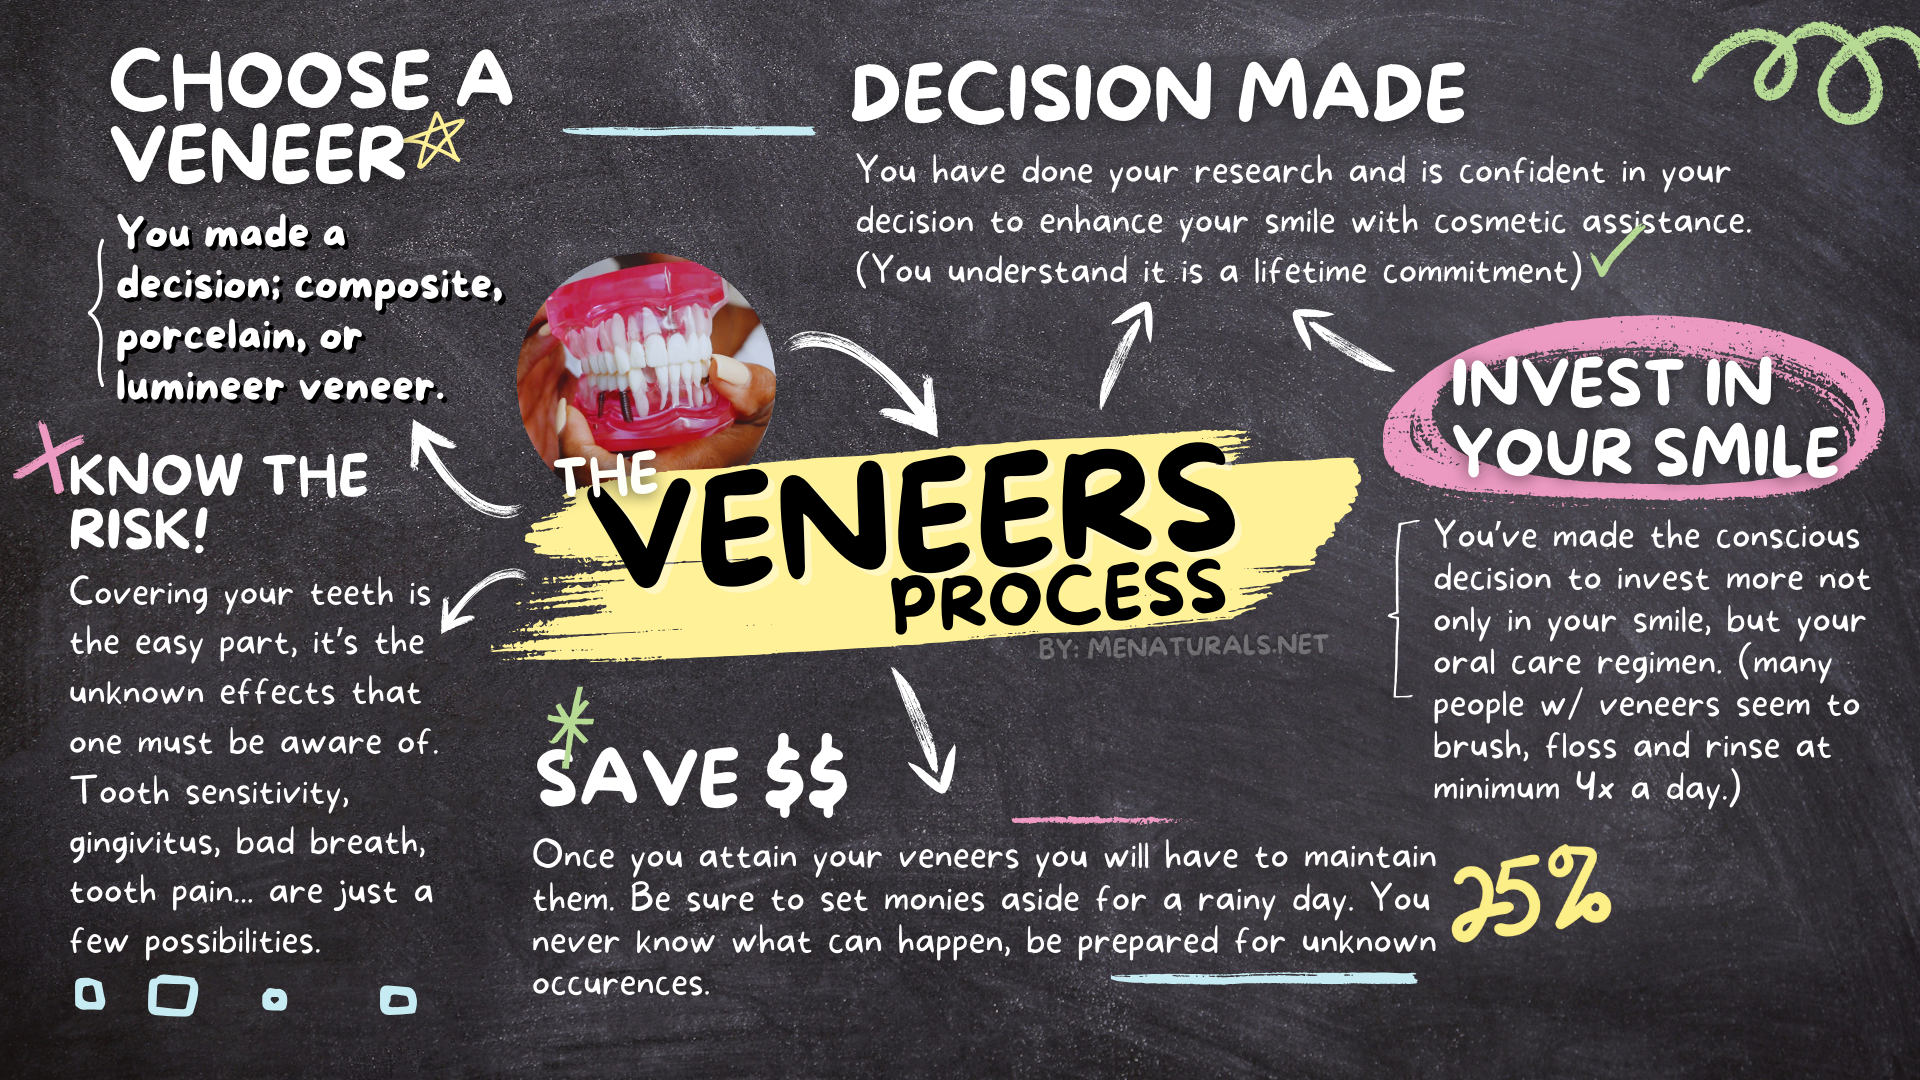 The Veneers Process | The truth and long-term care